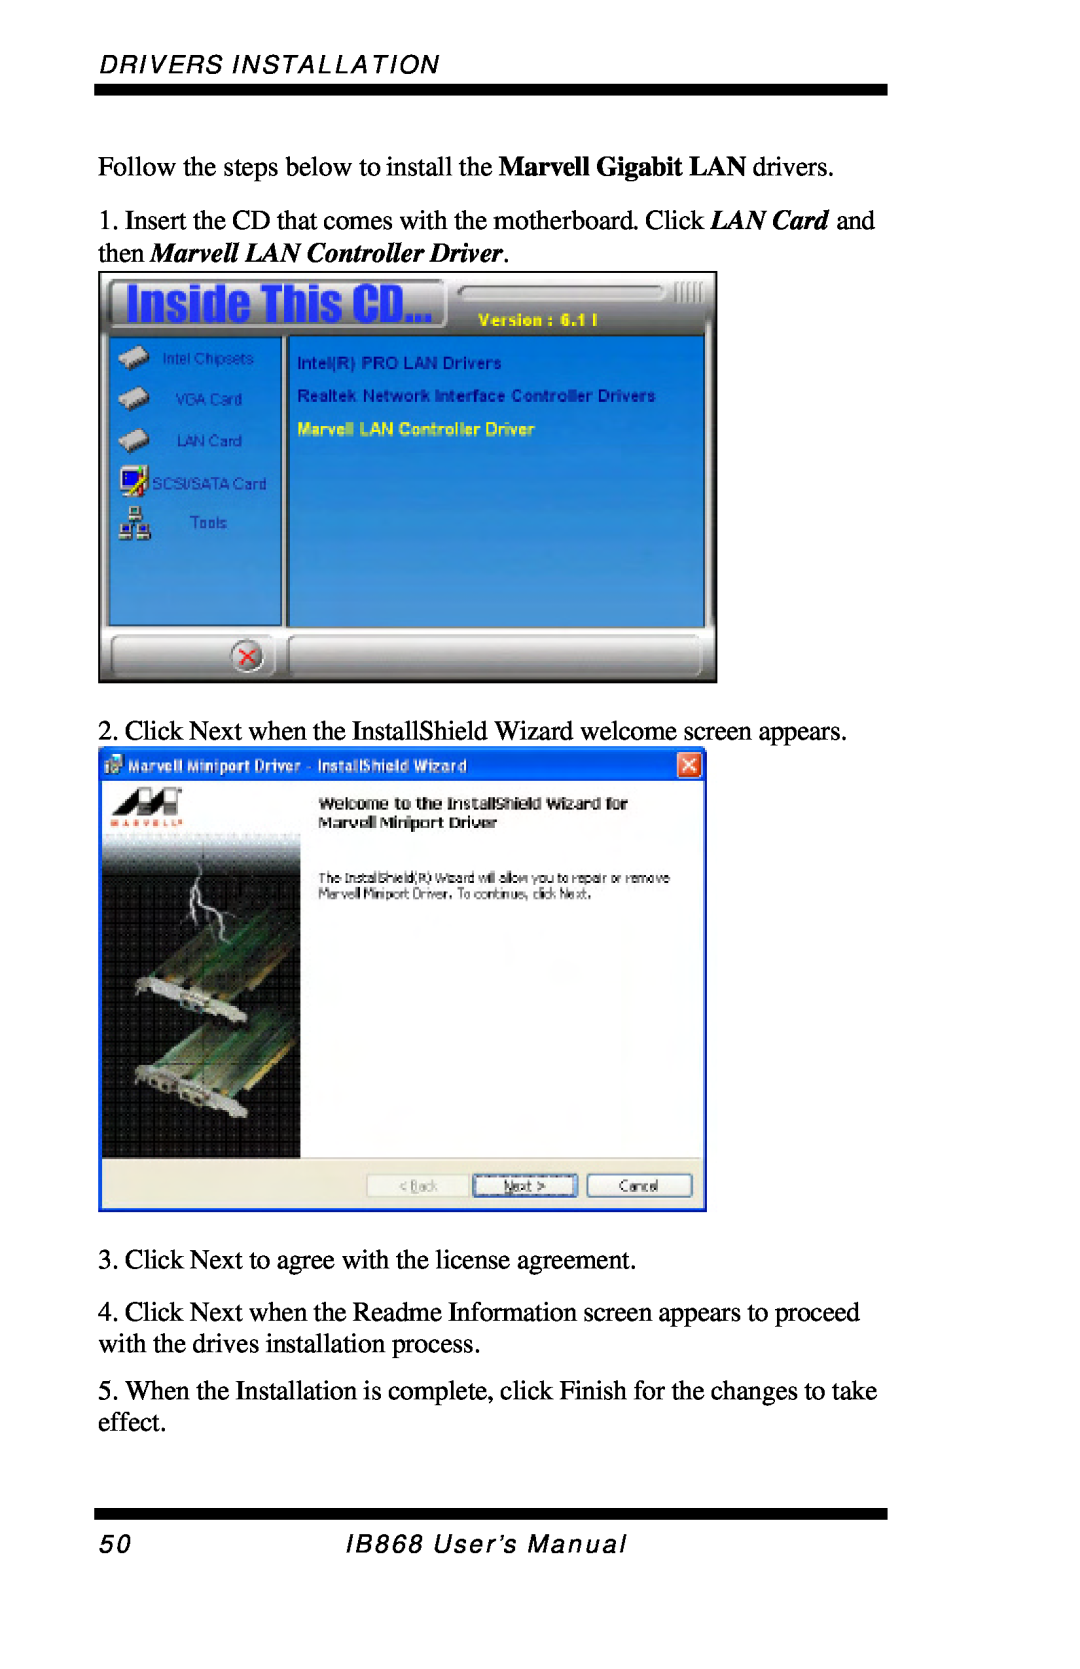 Intel IB868 user manual Click Next to agree with the license agreement 